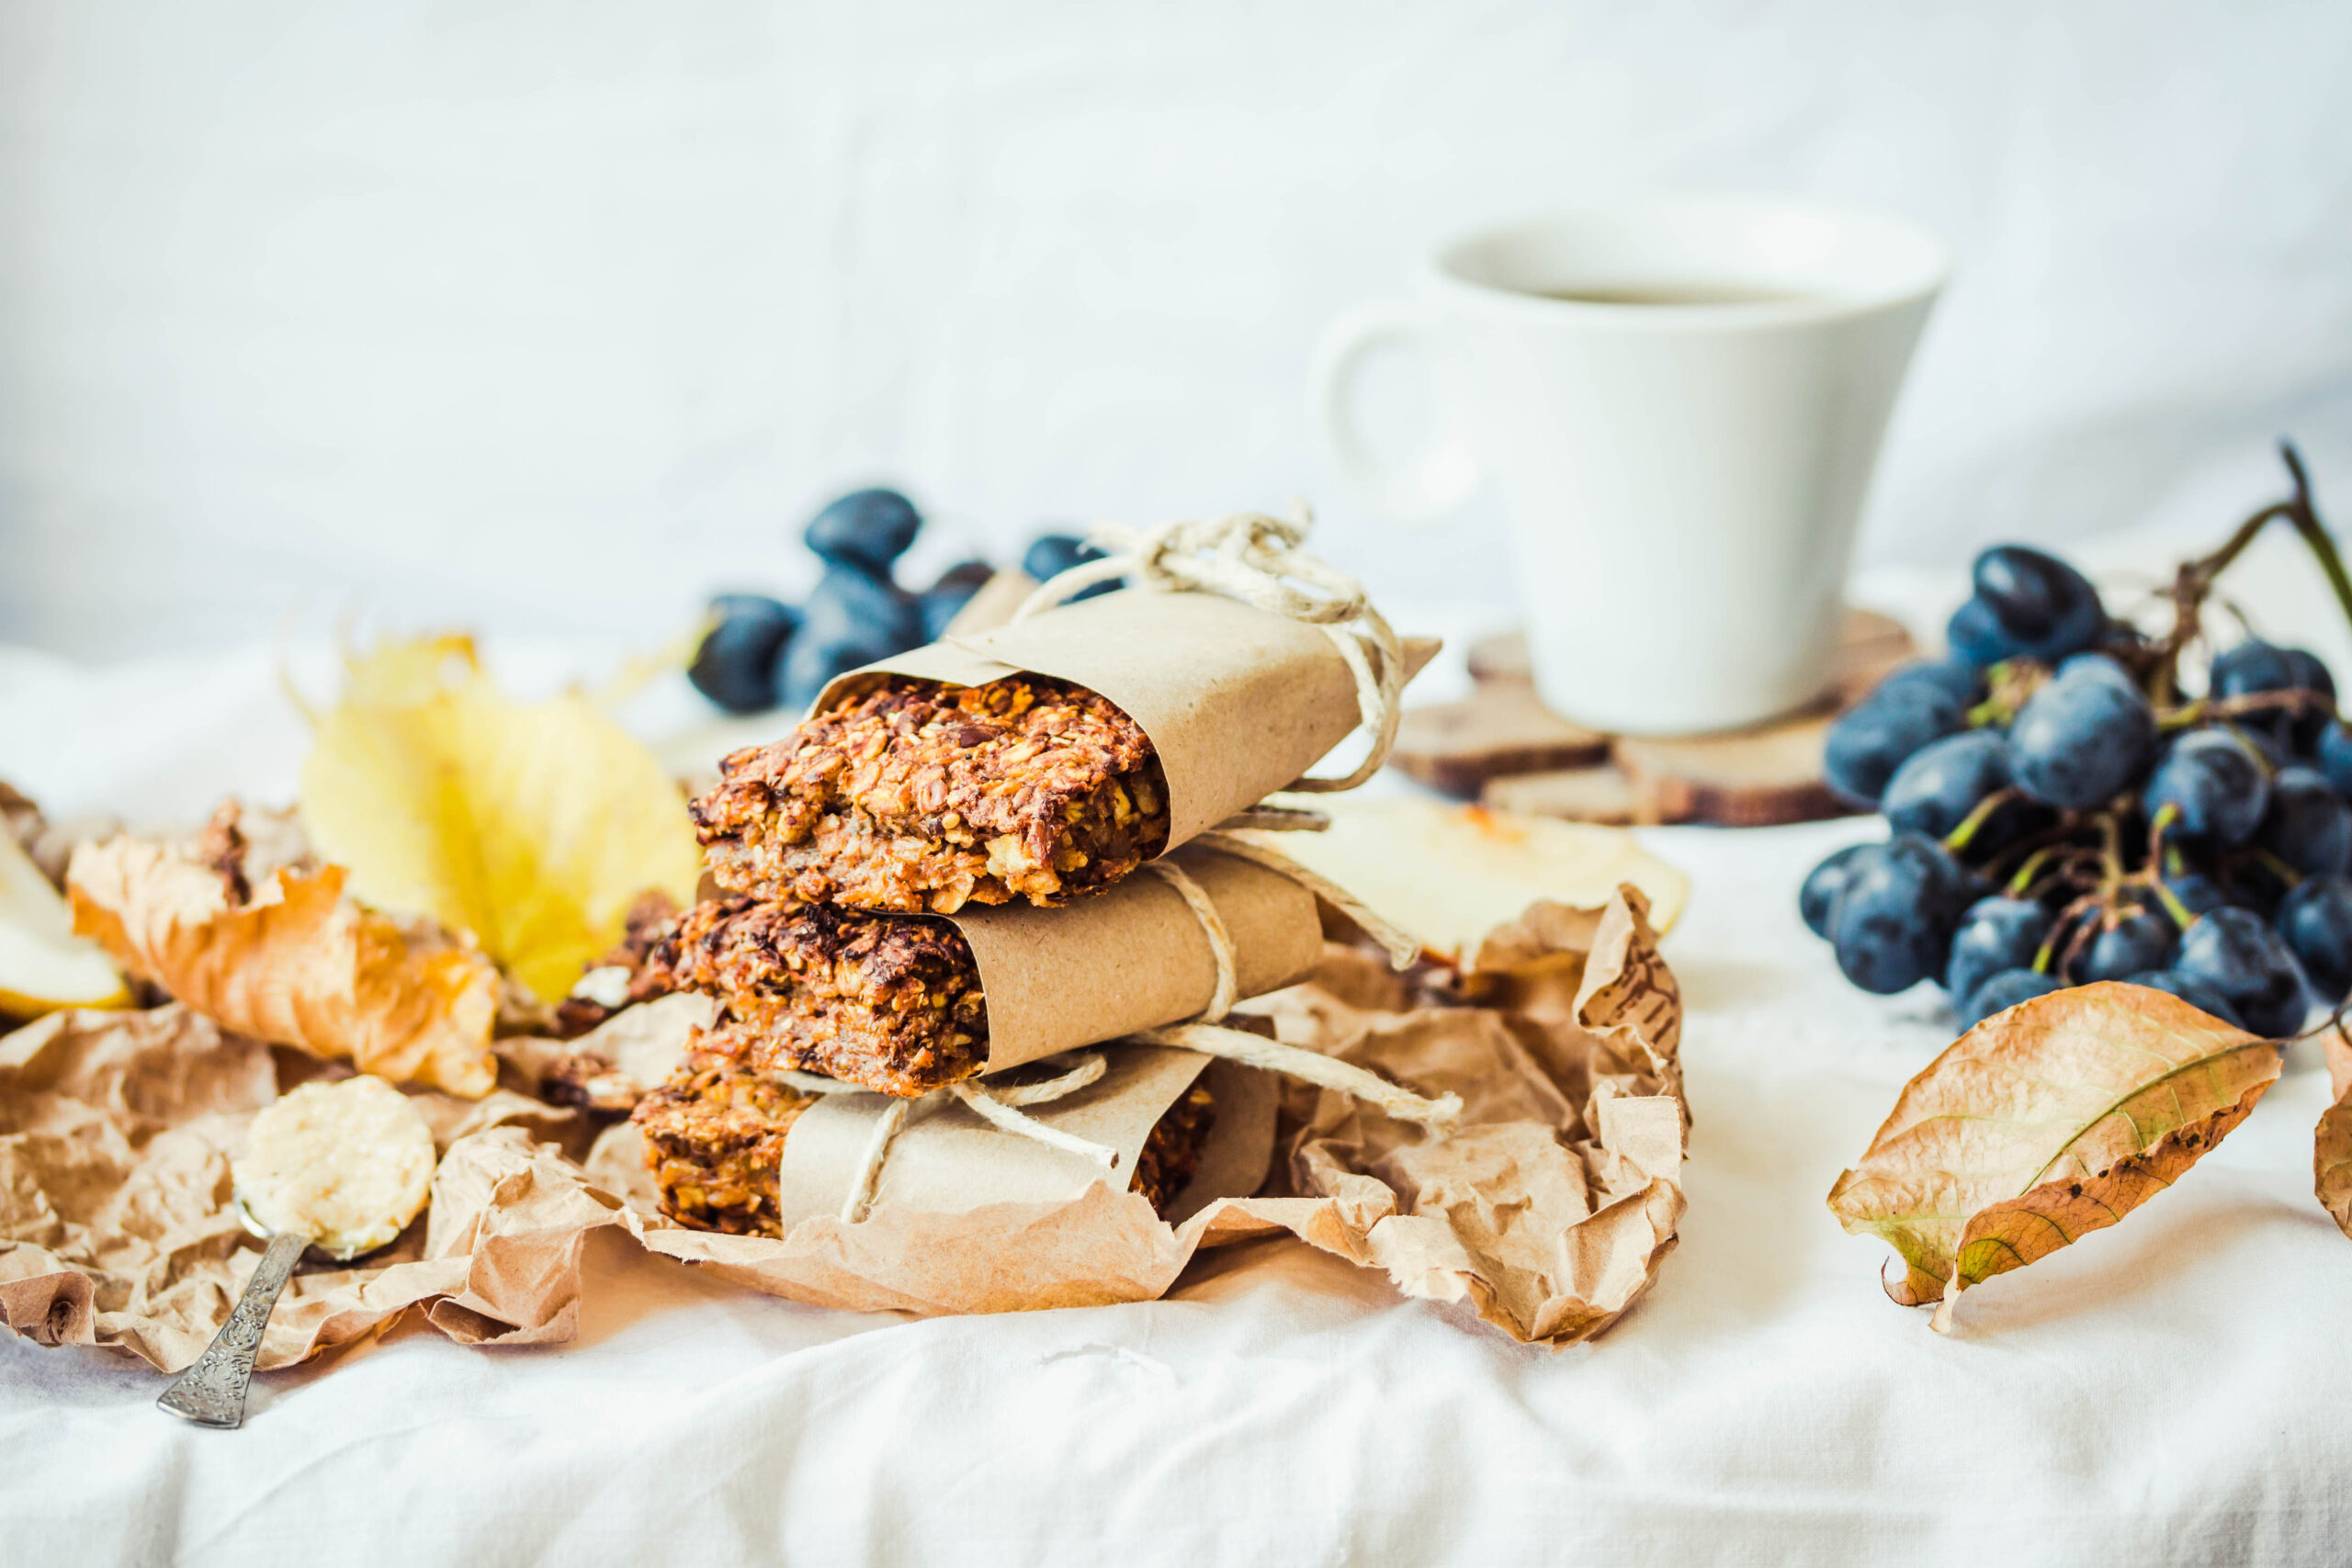 plant-based snacking on the rise